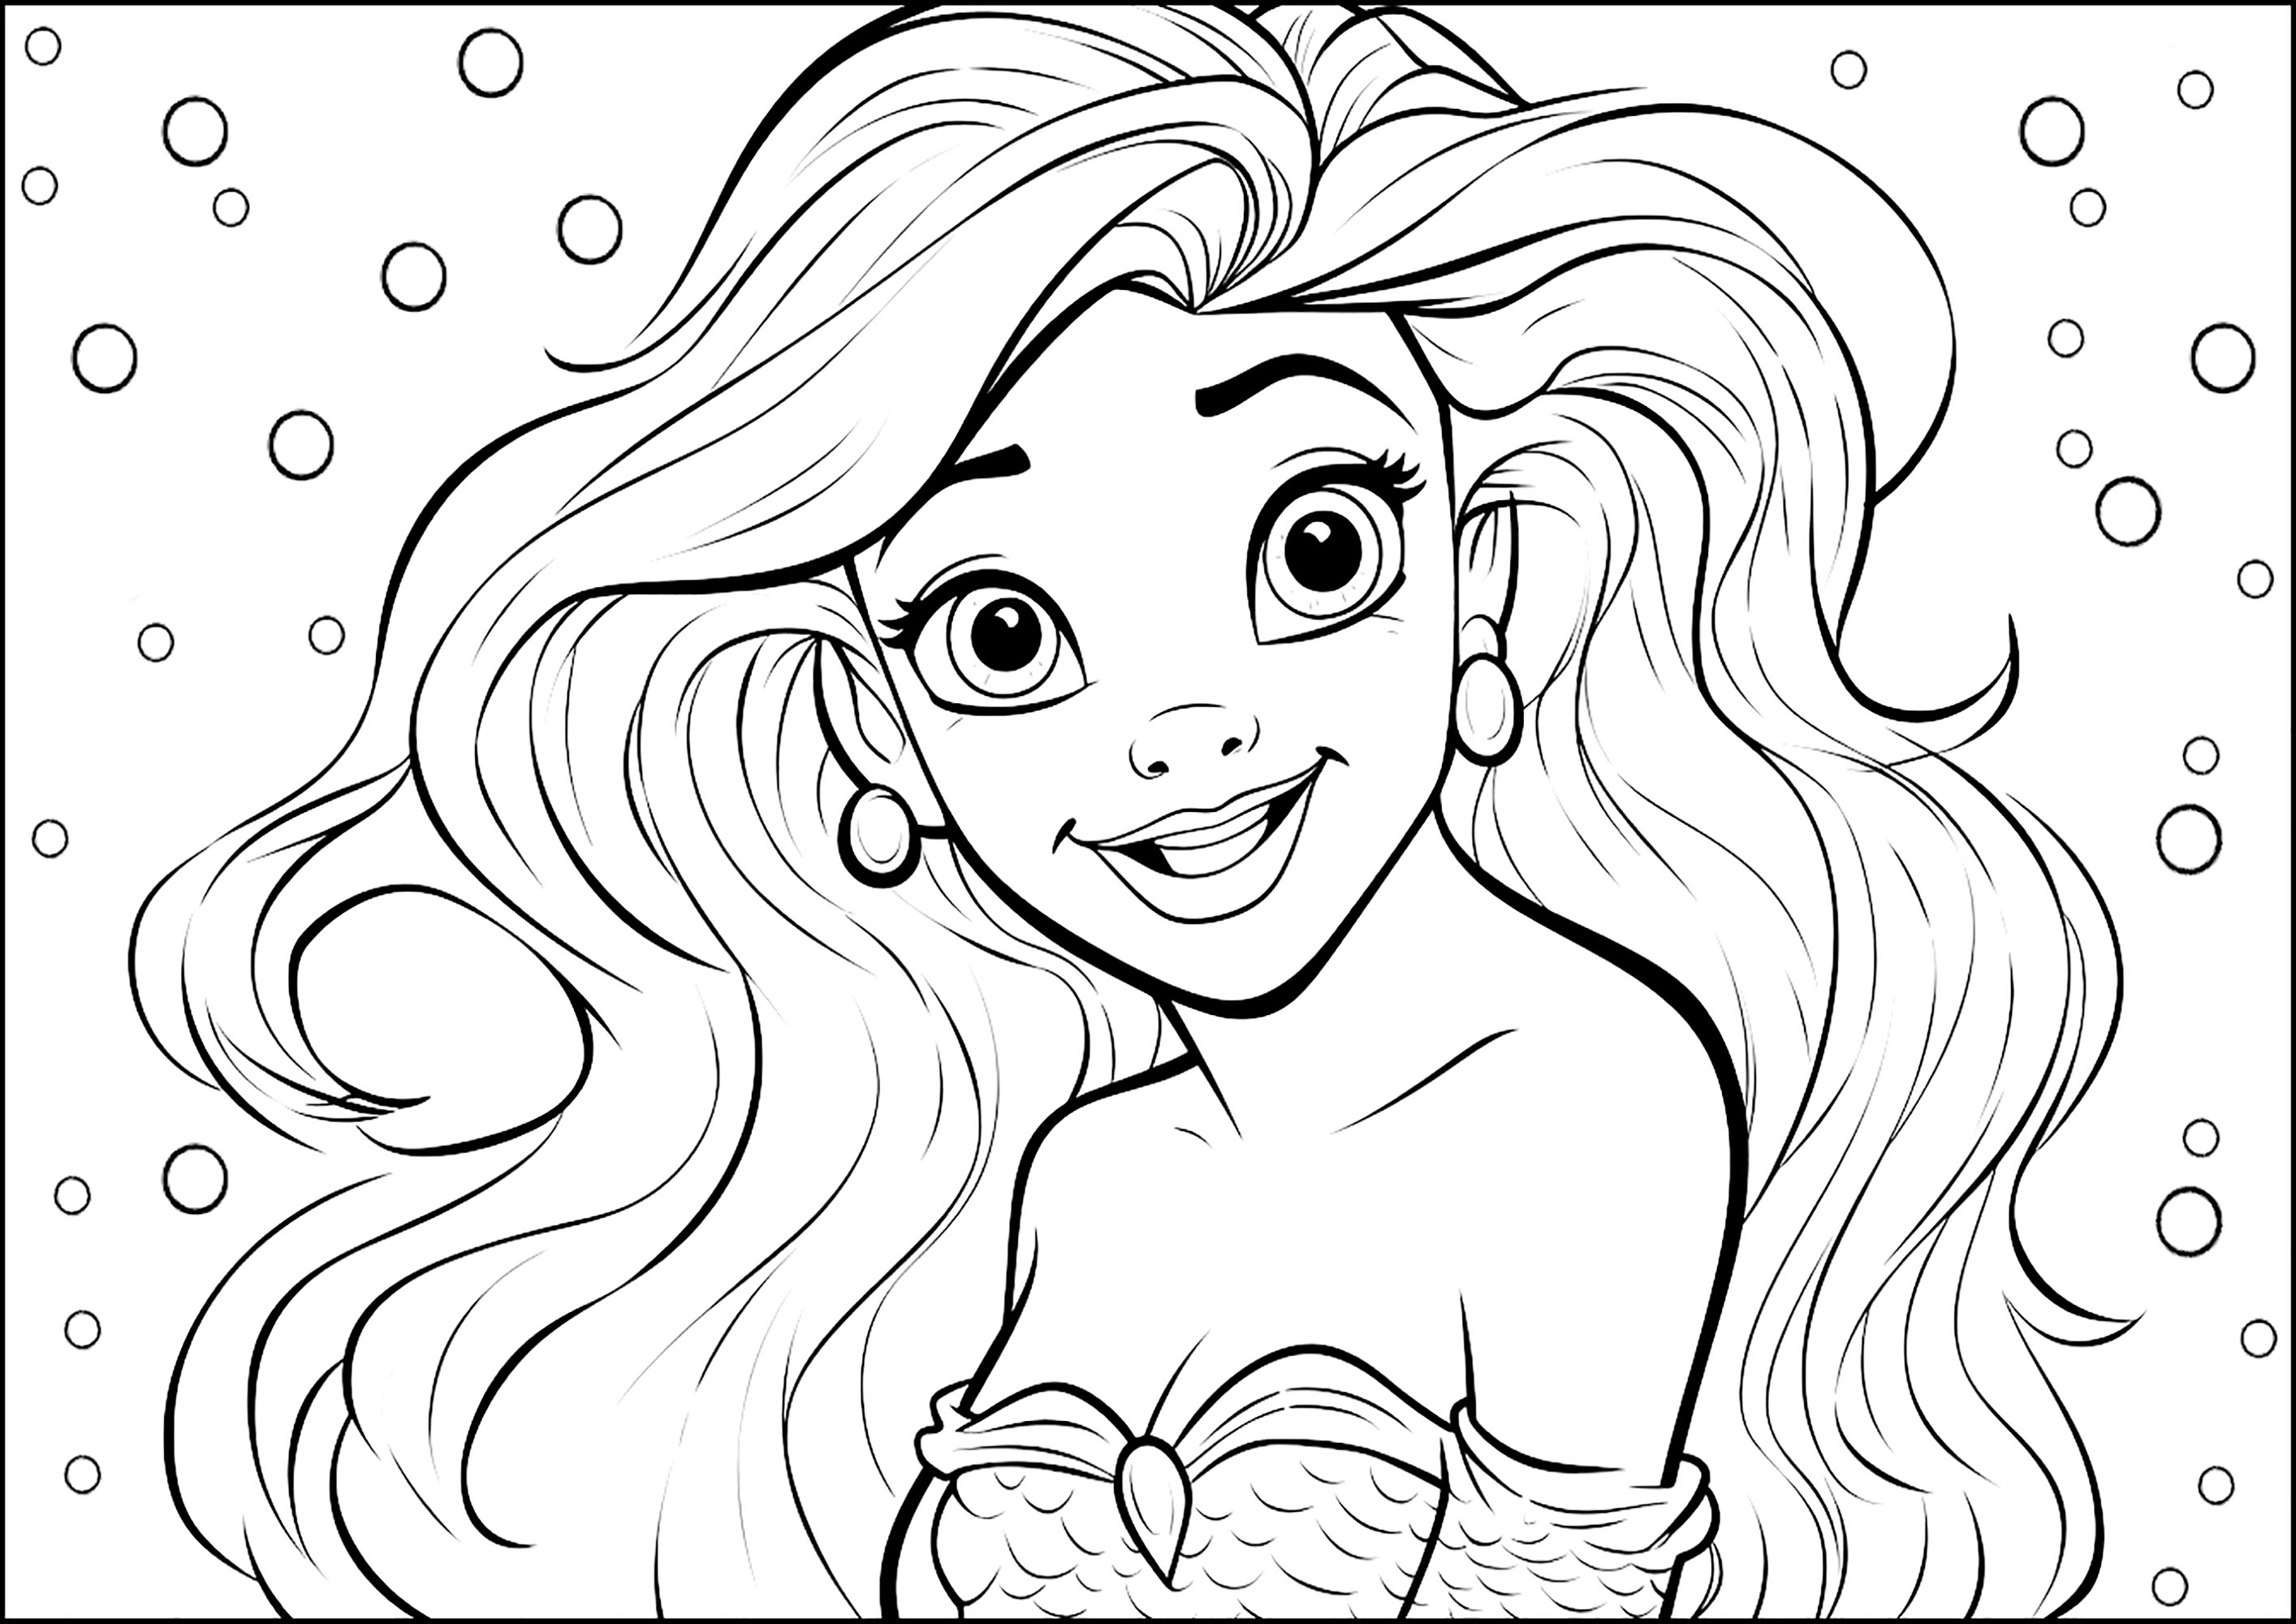 Pretty young mermaid surrounded by air bubbles. A design inspired by the Disney / Pixar style